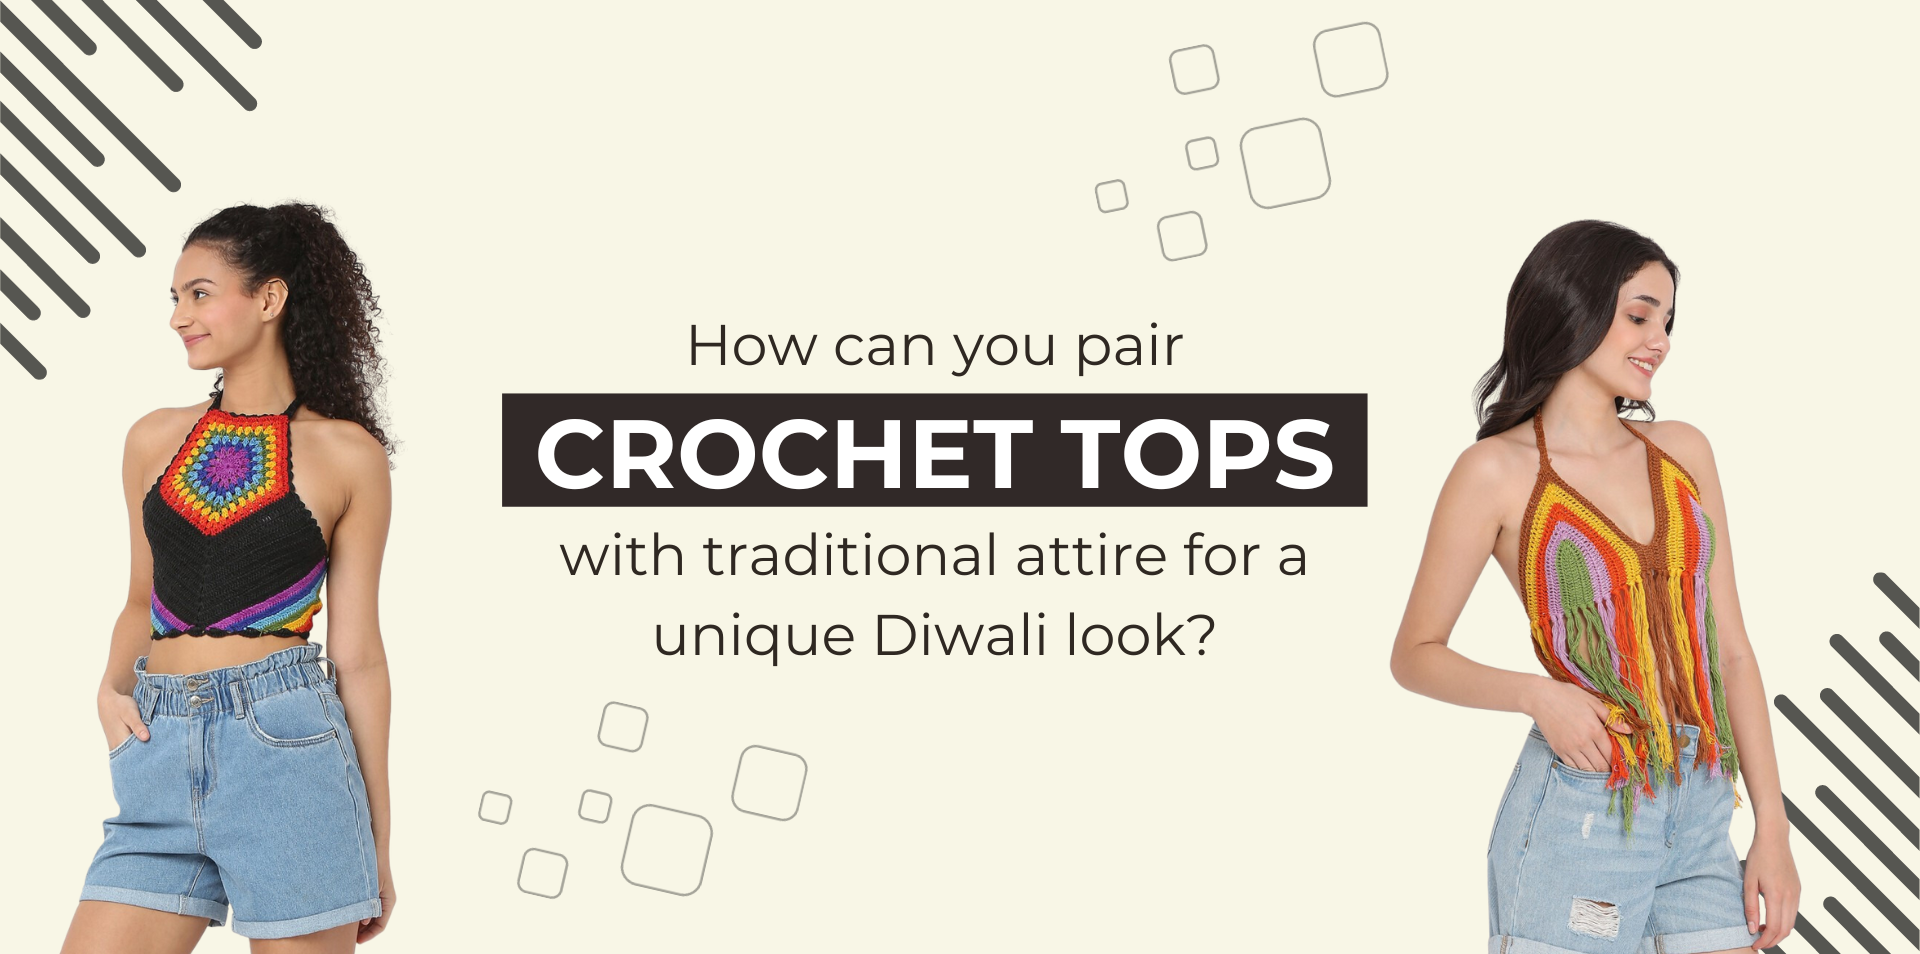 How Can You Pair Crochet Tops With Traditional Attire for a Unique Diwali Look